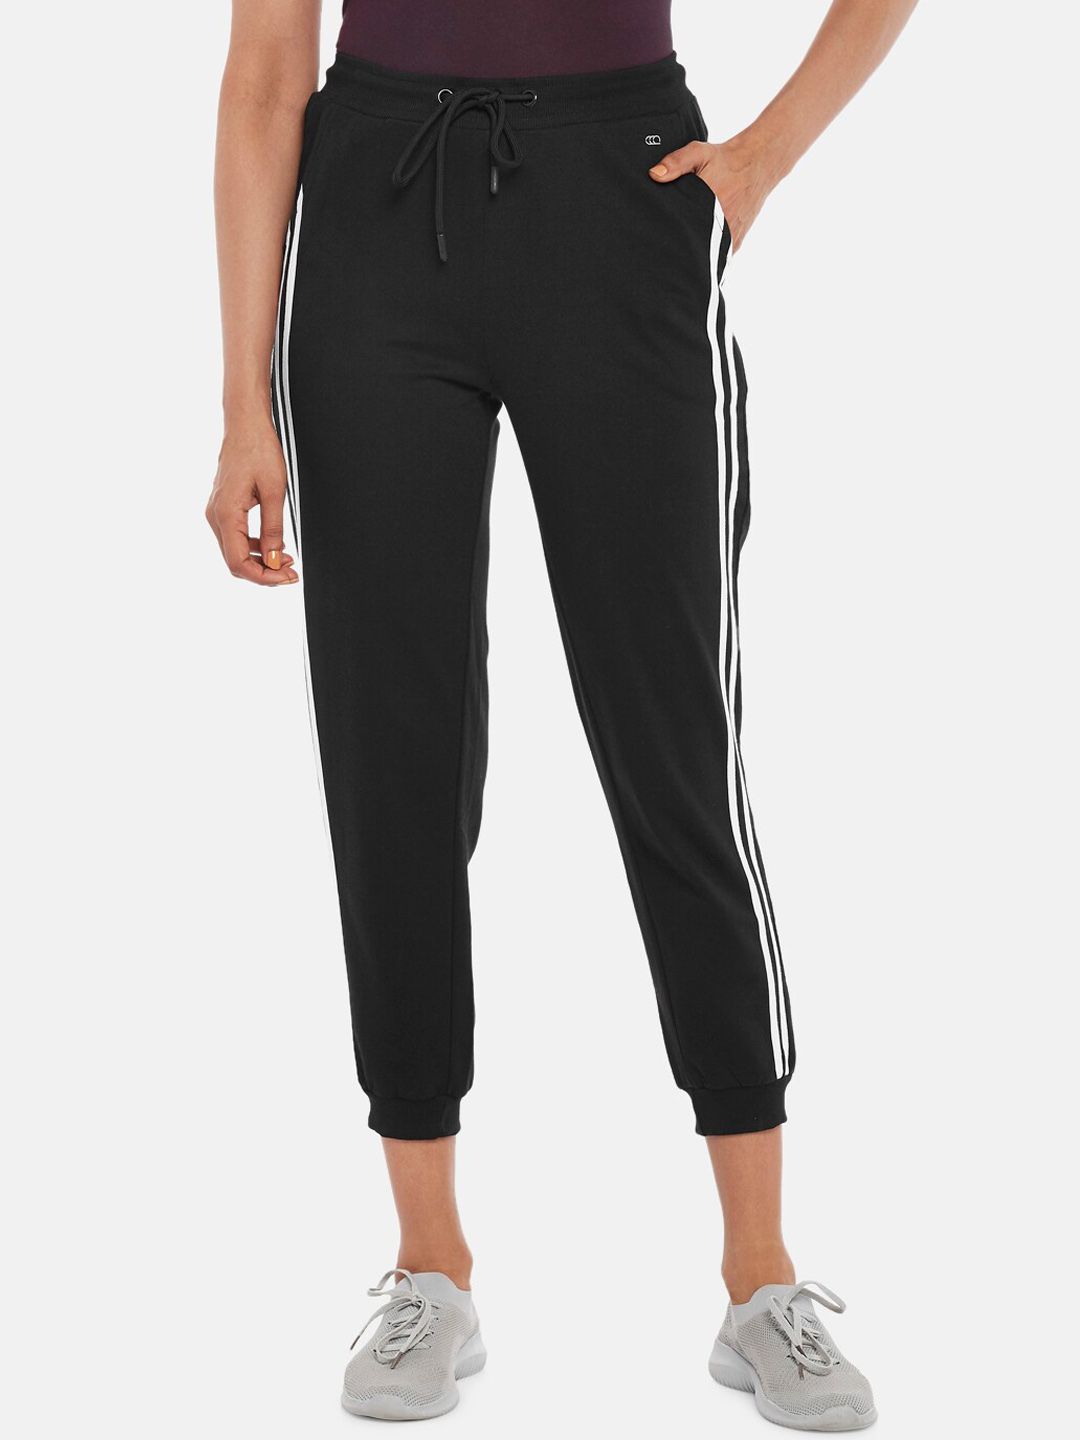 Ajile by Pantaloons Women Black Solid Cotton Joggers Price in India